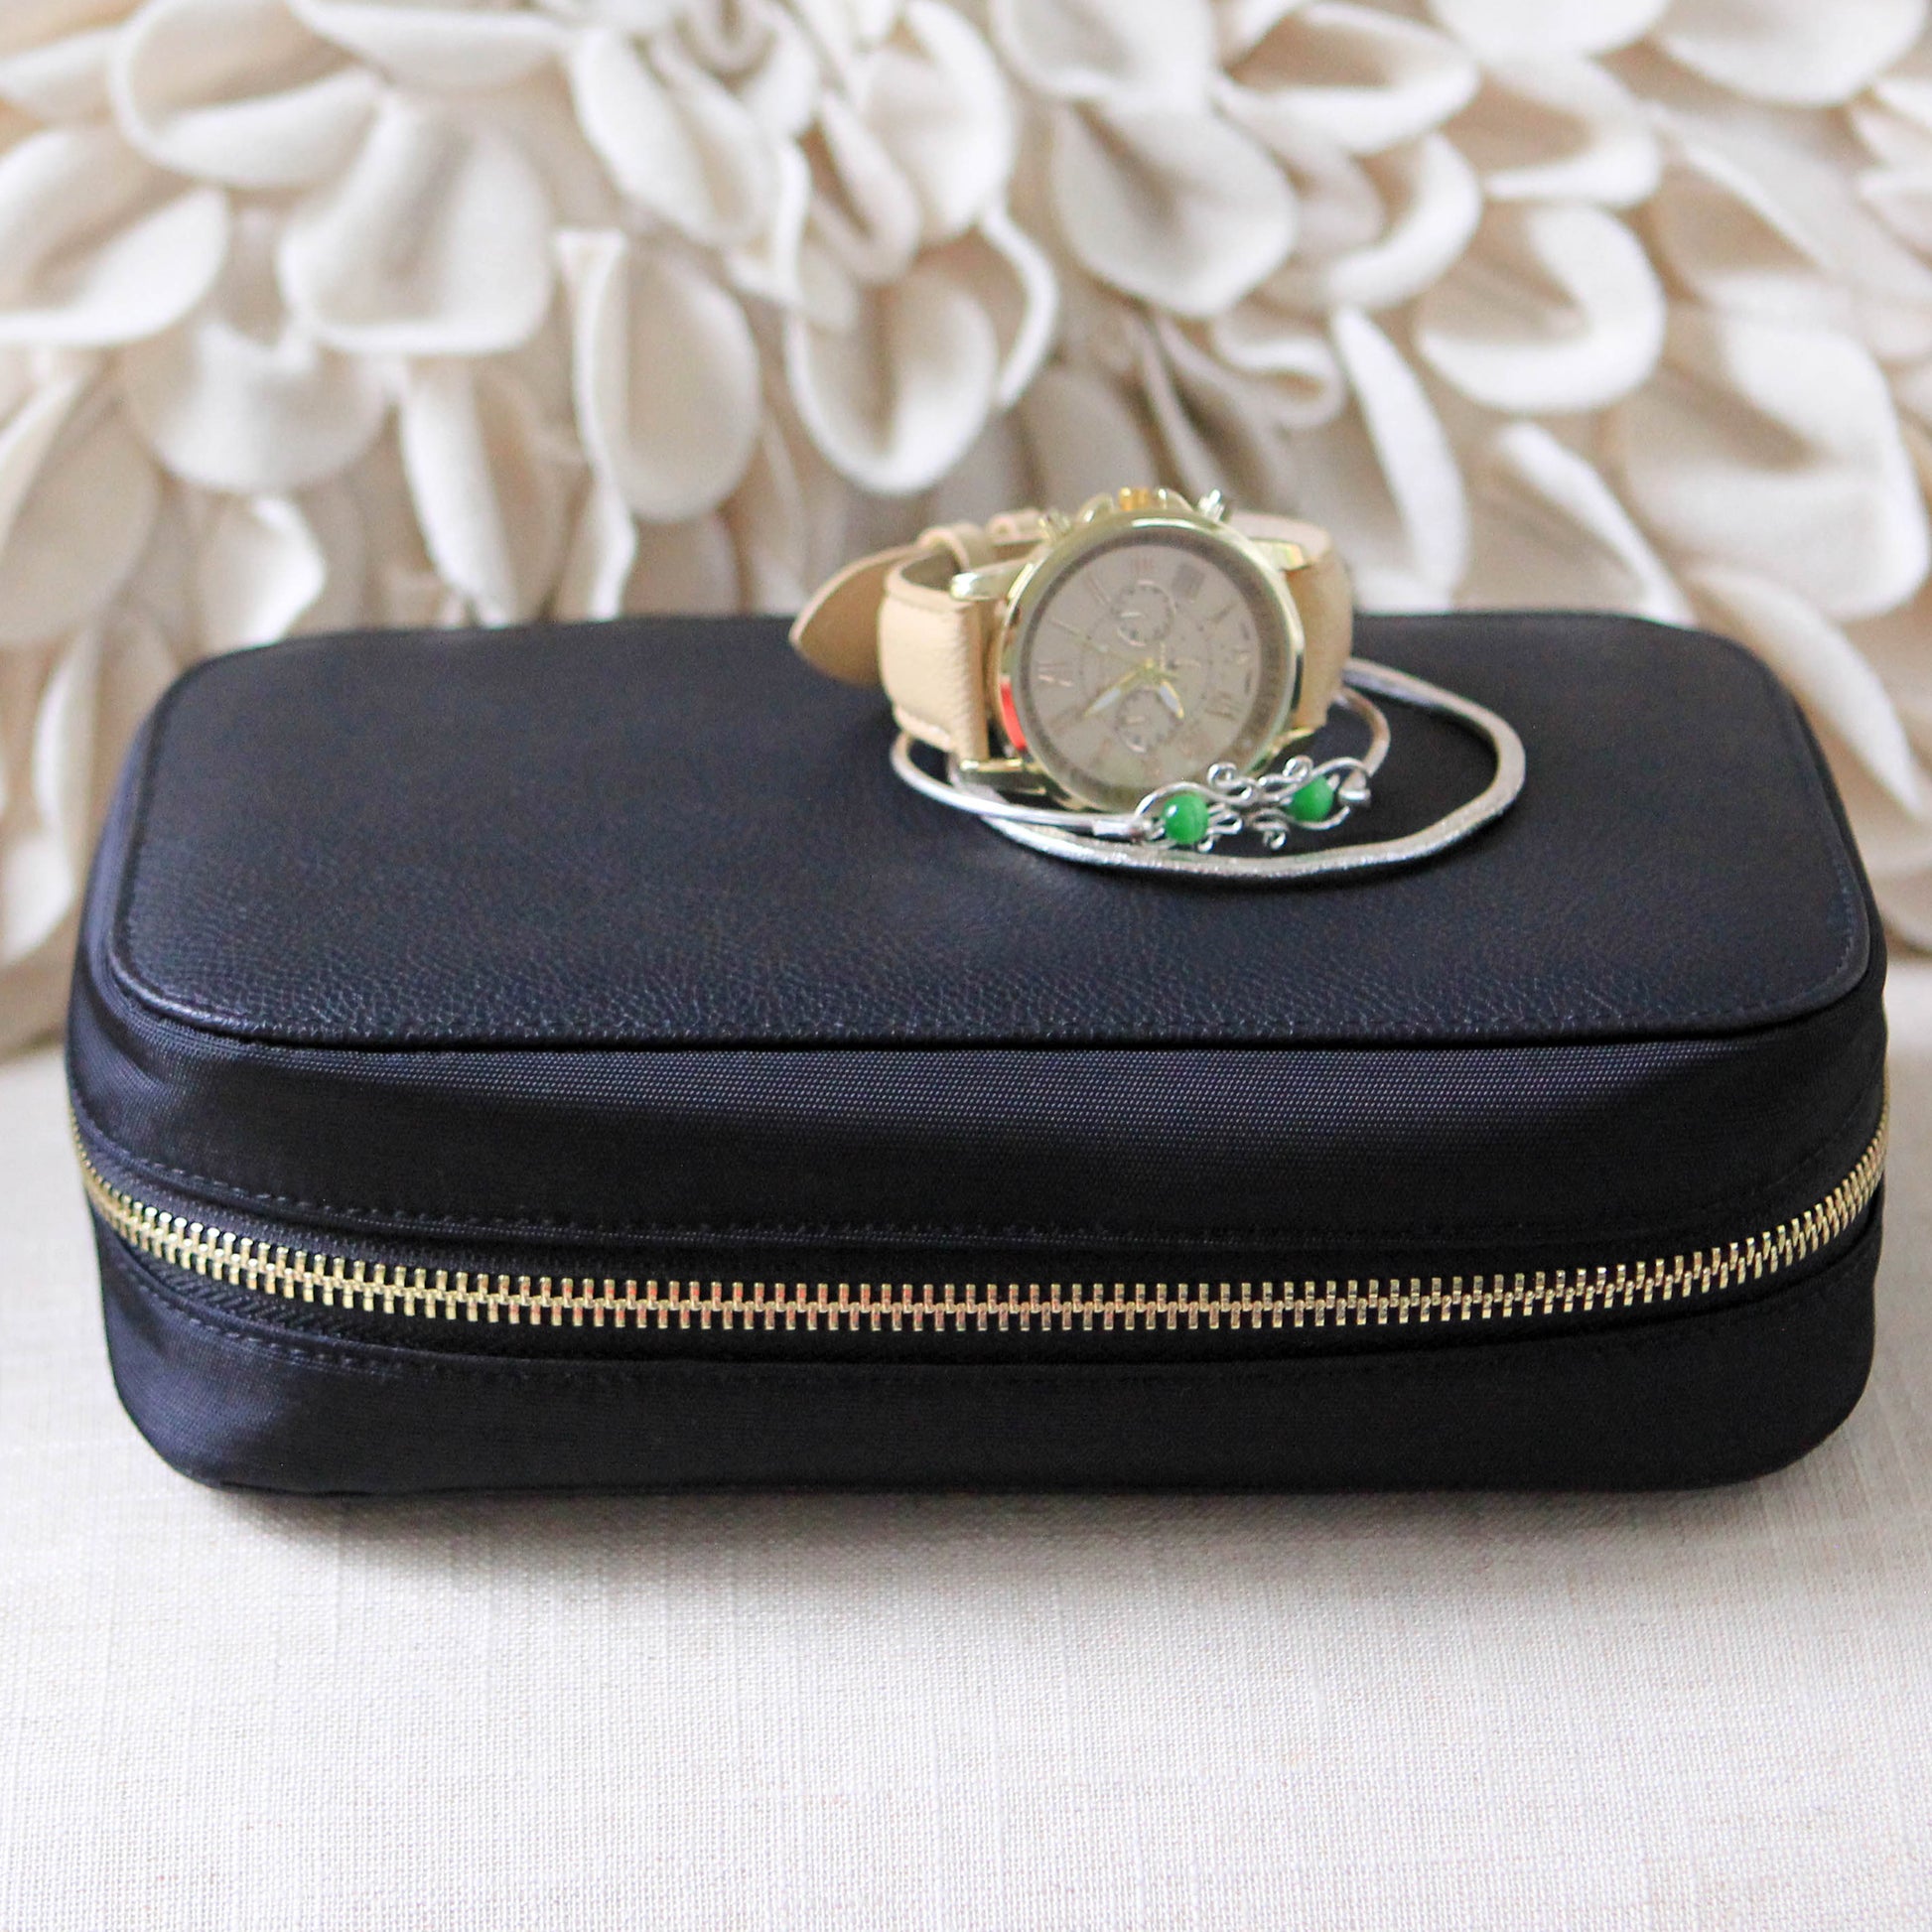 LuxeLeather Jewelry Travel Case: Stylish Security for Your Treasures on the  Go – PURAJOIA